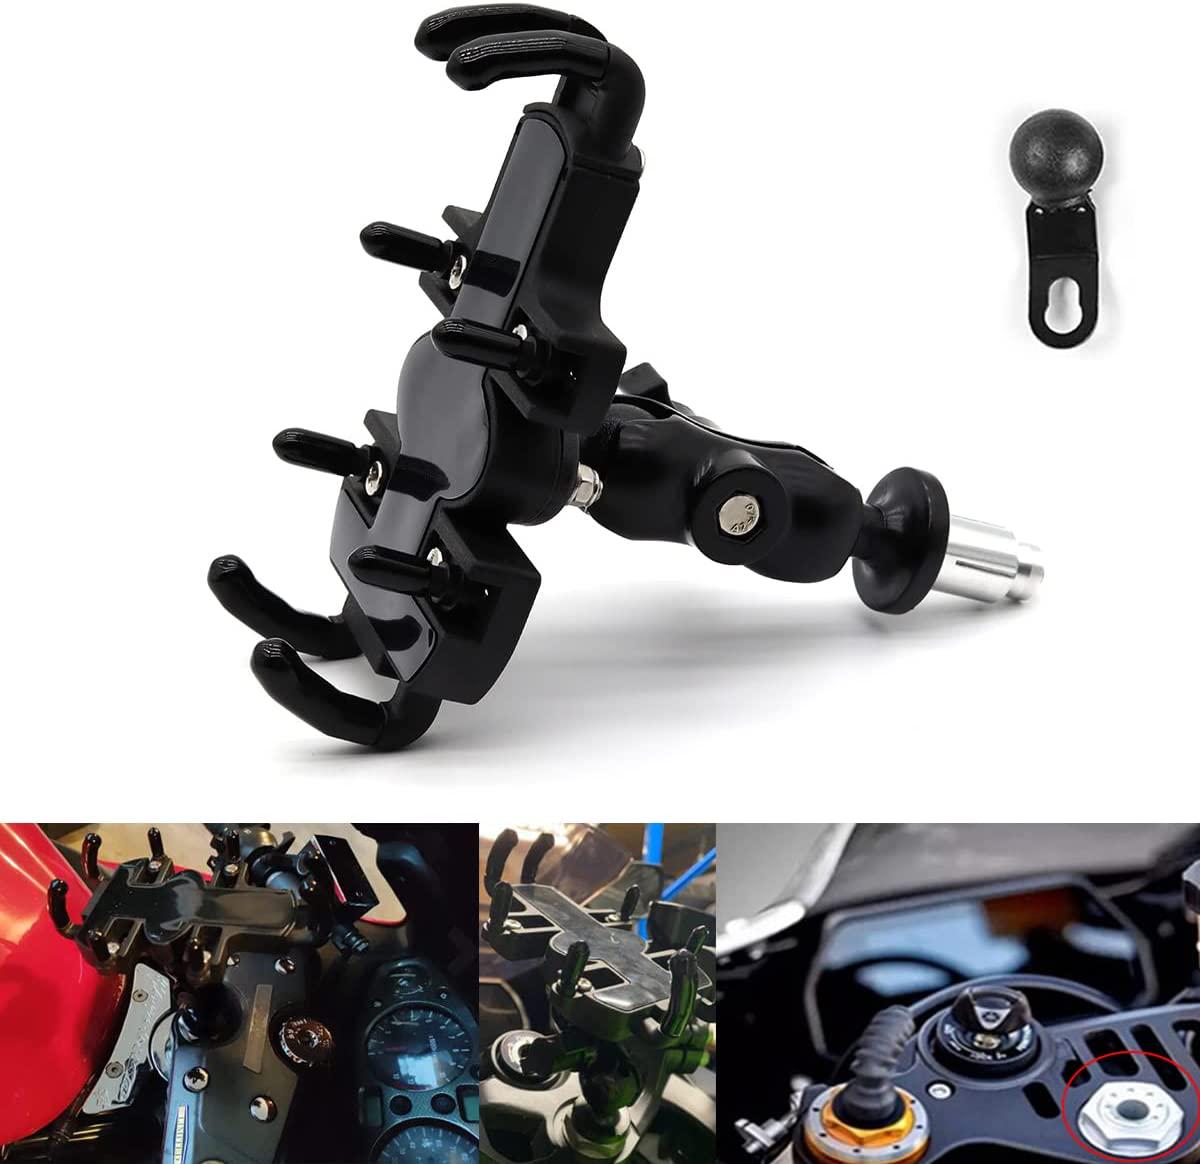 kucehiup, Kucehiup Motorcycle Mobile Phone Mount Mobile Phone Holder Fit on All Motorcycles with Holes Fixing Device (Black2 Fit 4-6.8in Screen)